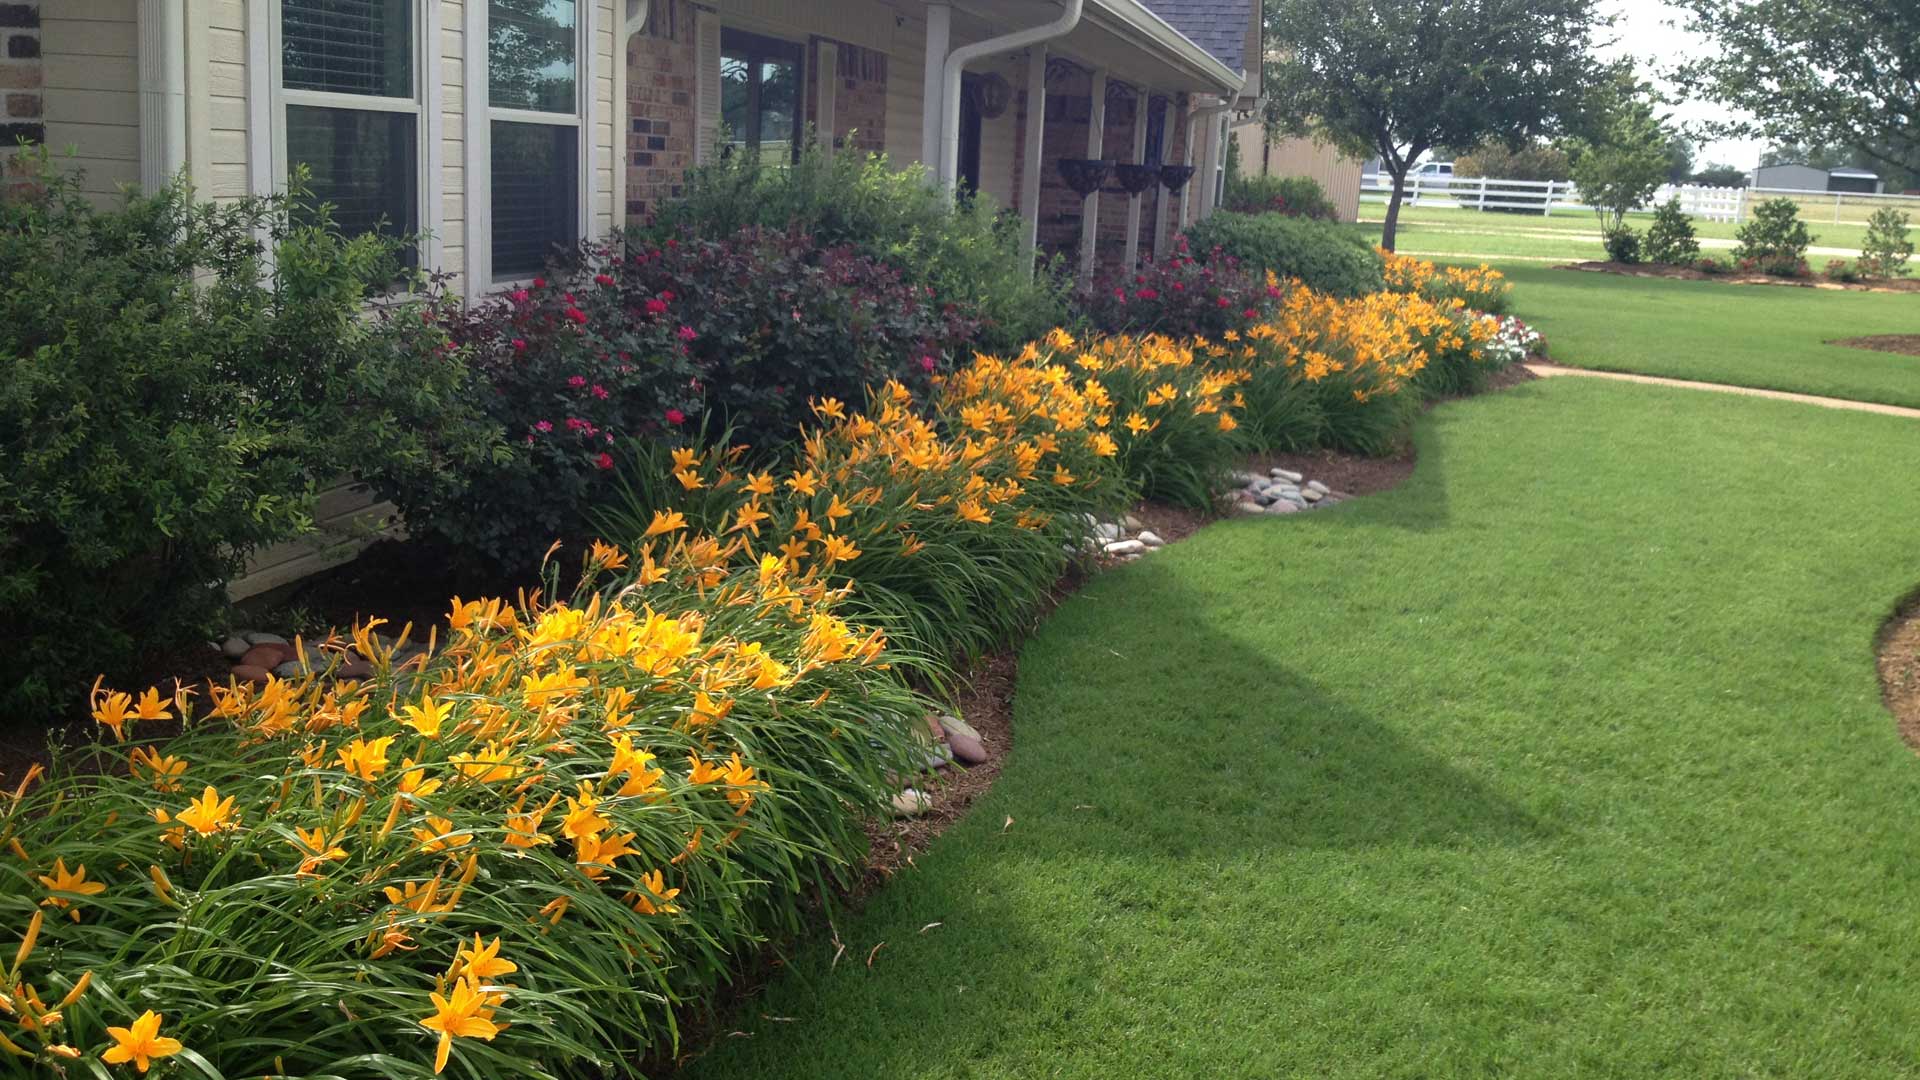 Landscape bed with blooming plants in Hewitt, TX.